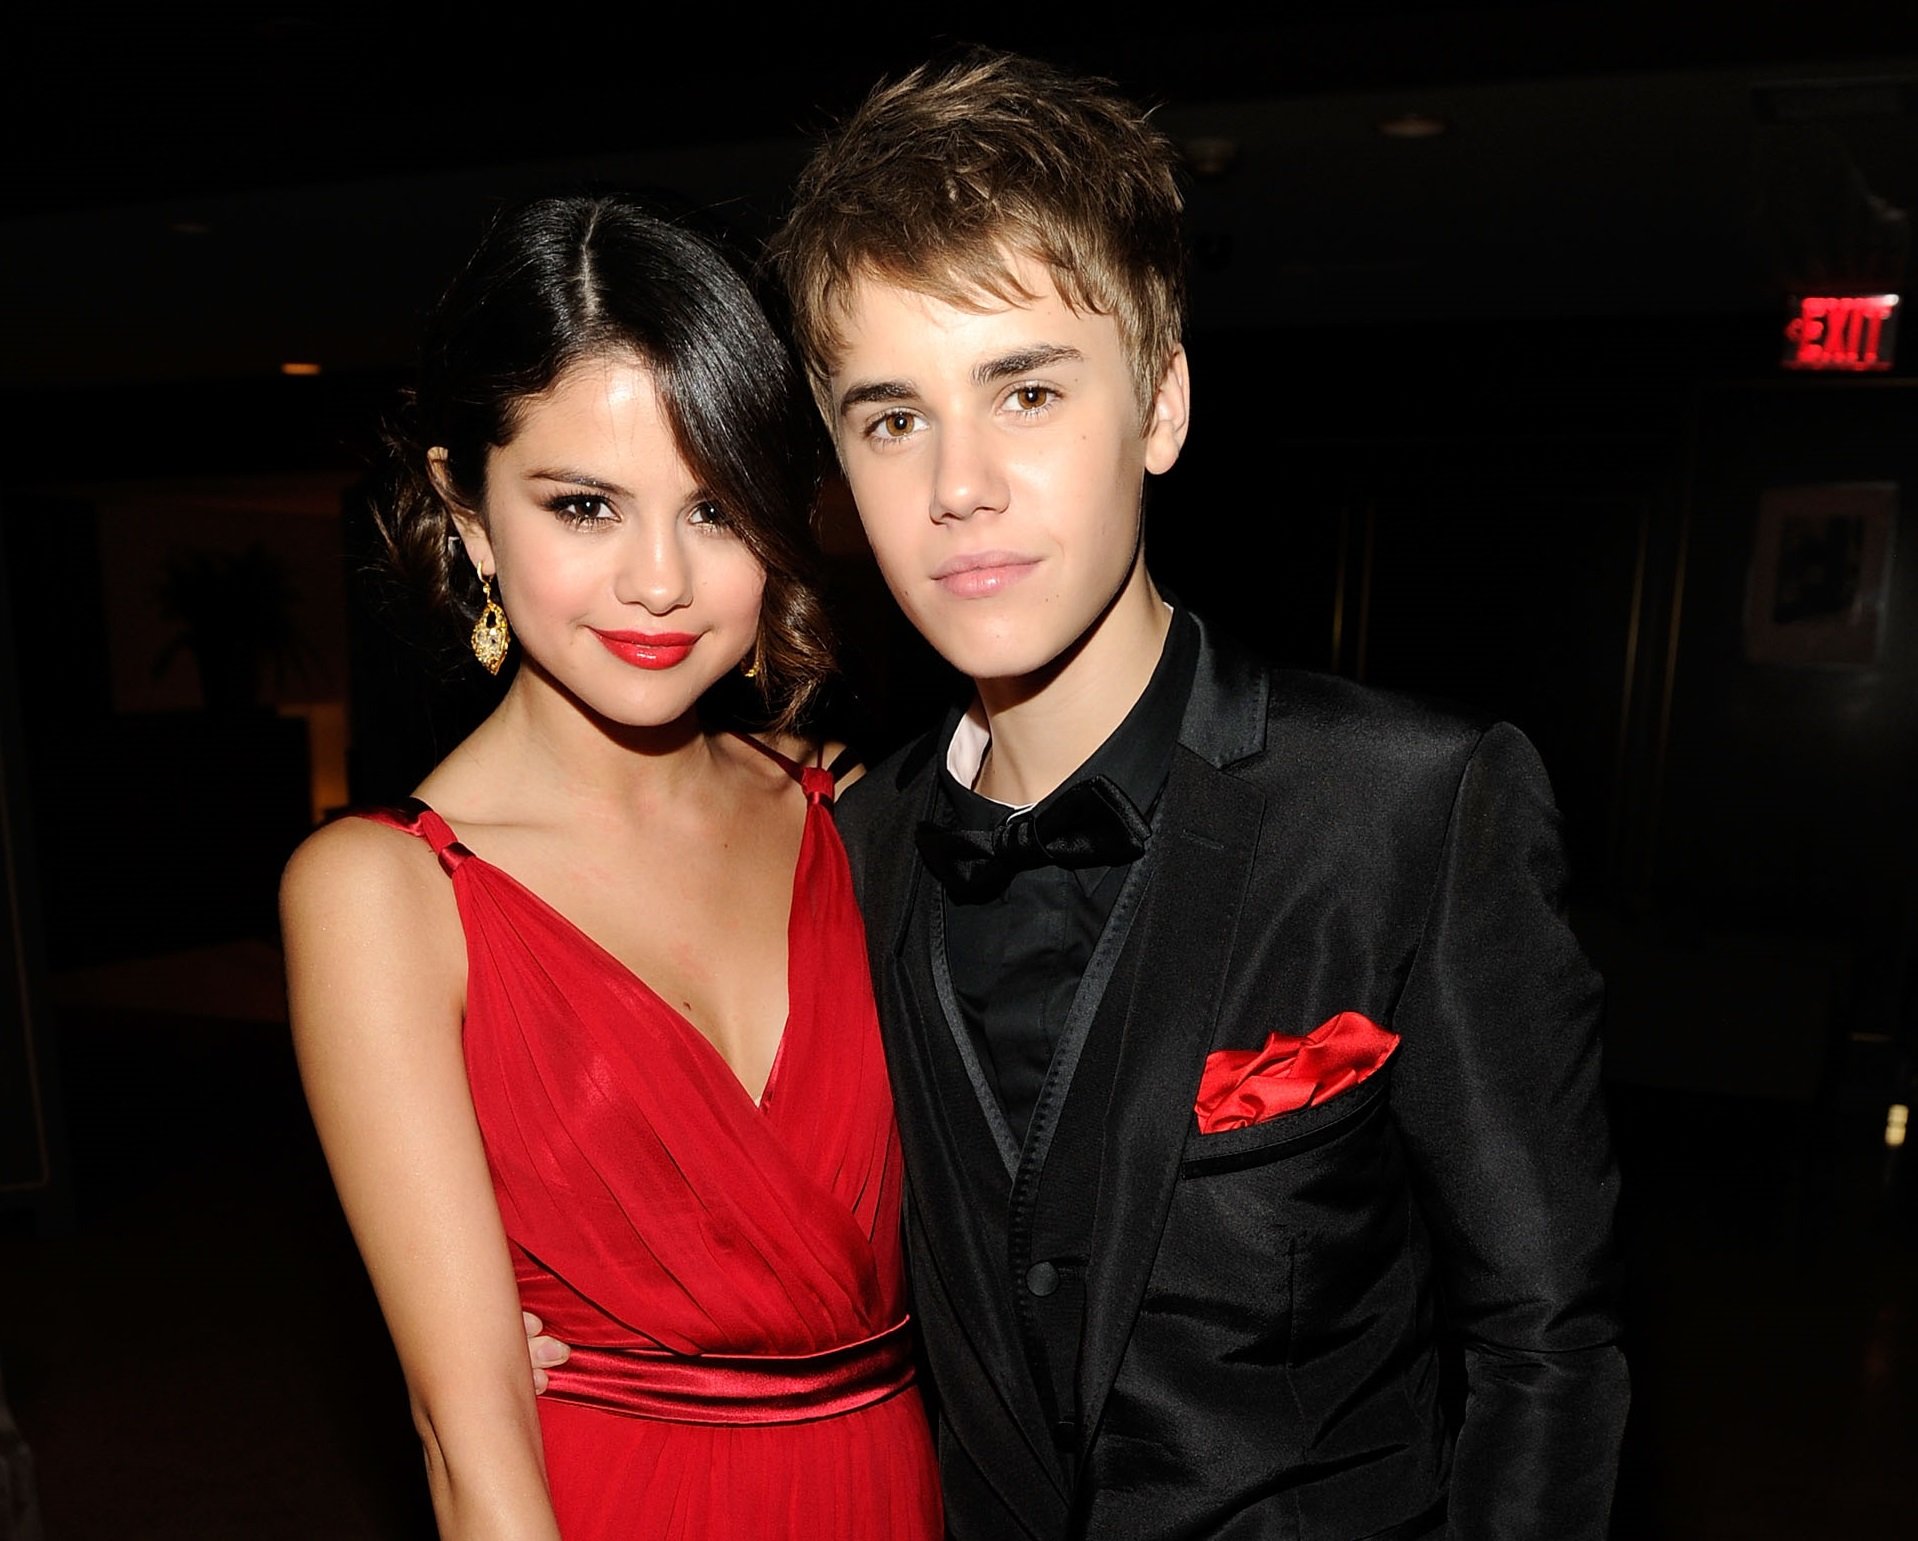 Selena Gomez and Justin Bieber attend the 2011 Vanity Fair Oscar Party